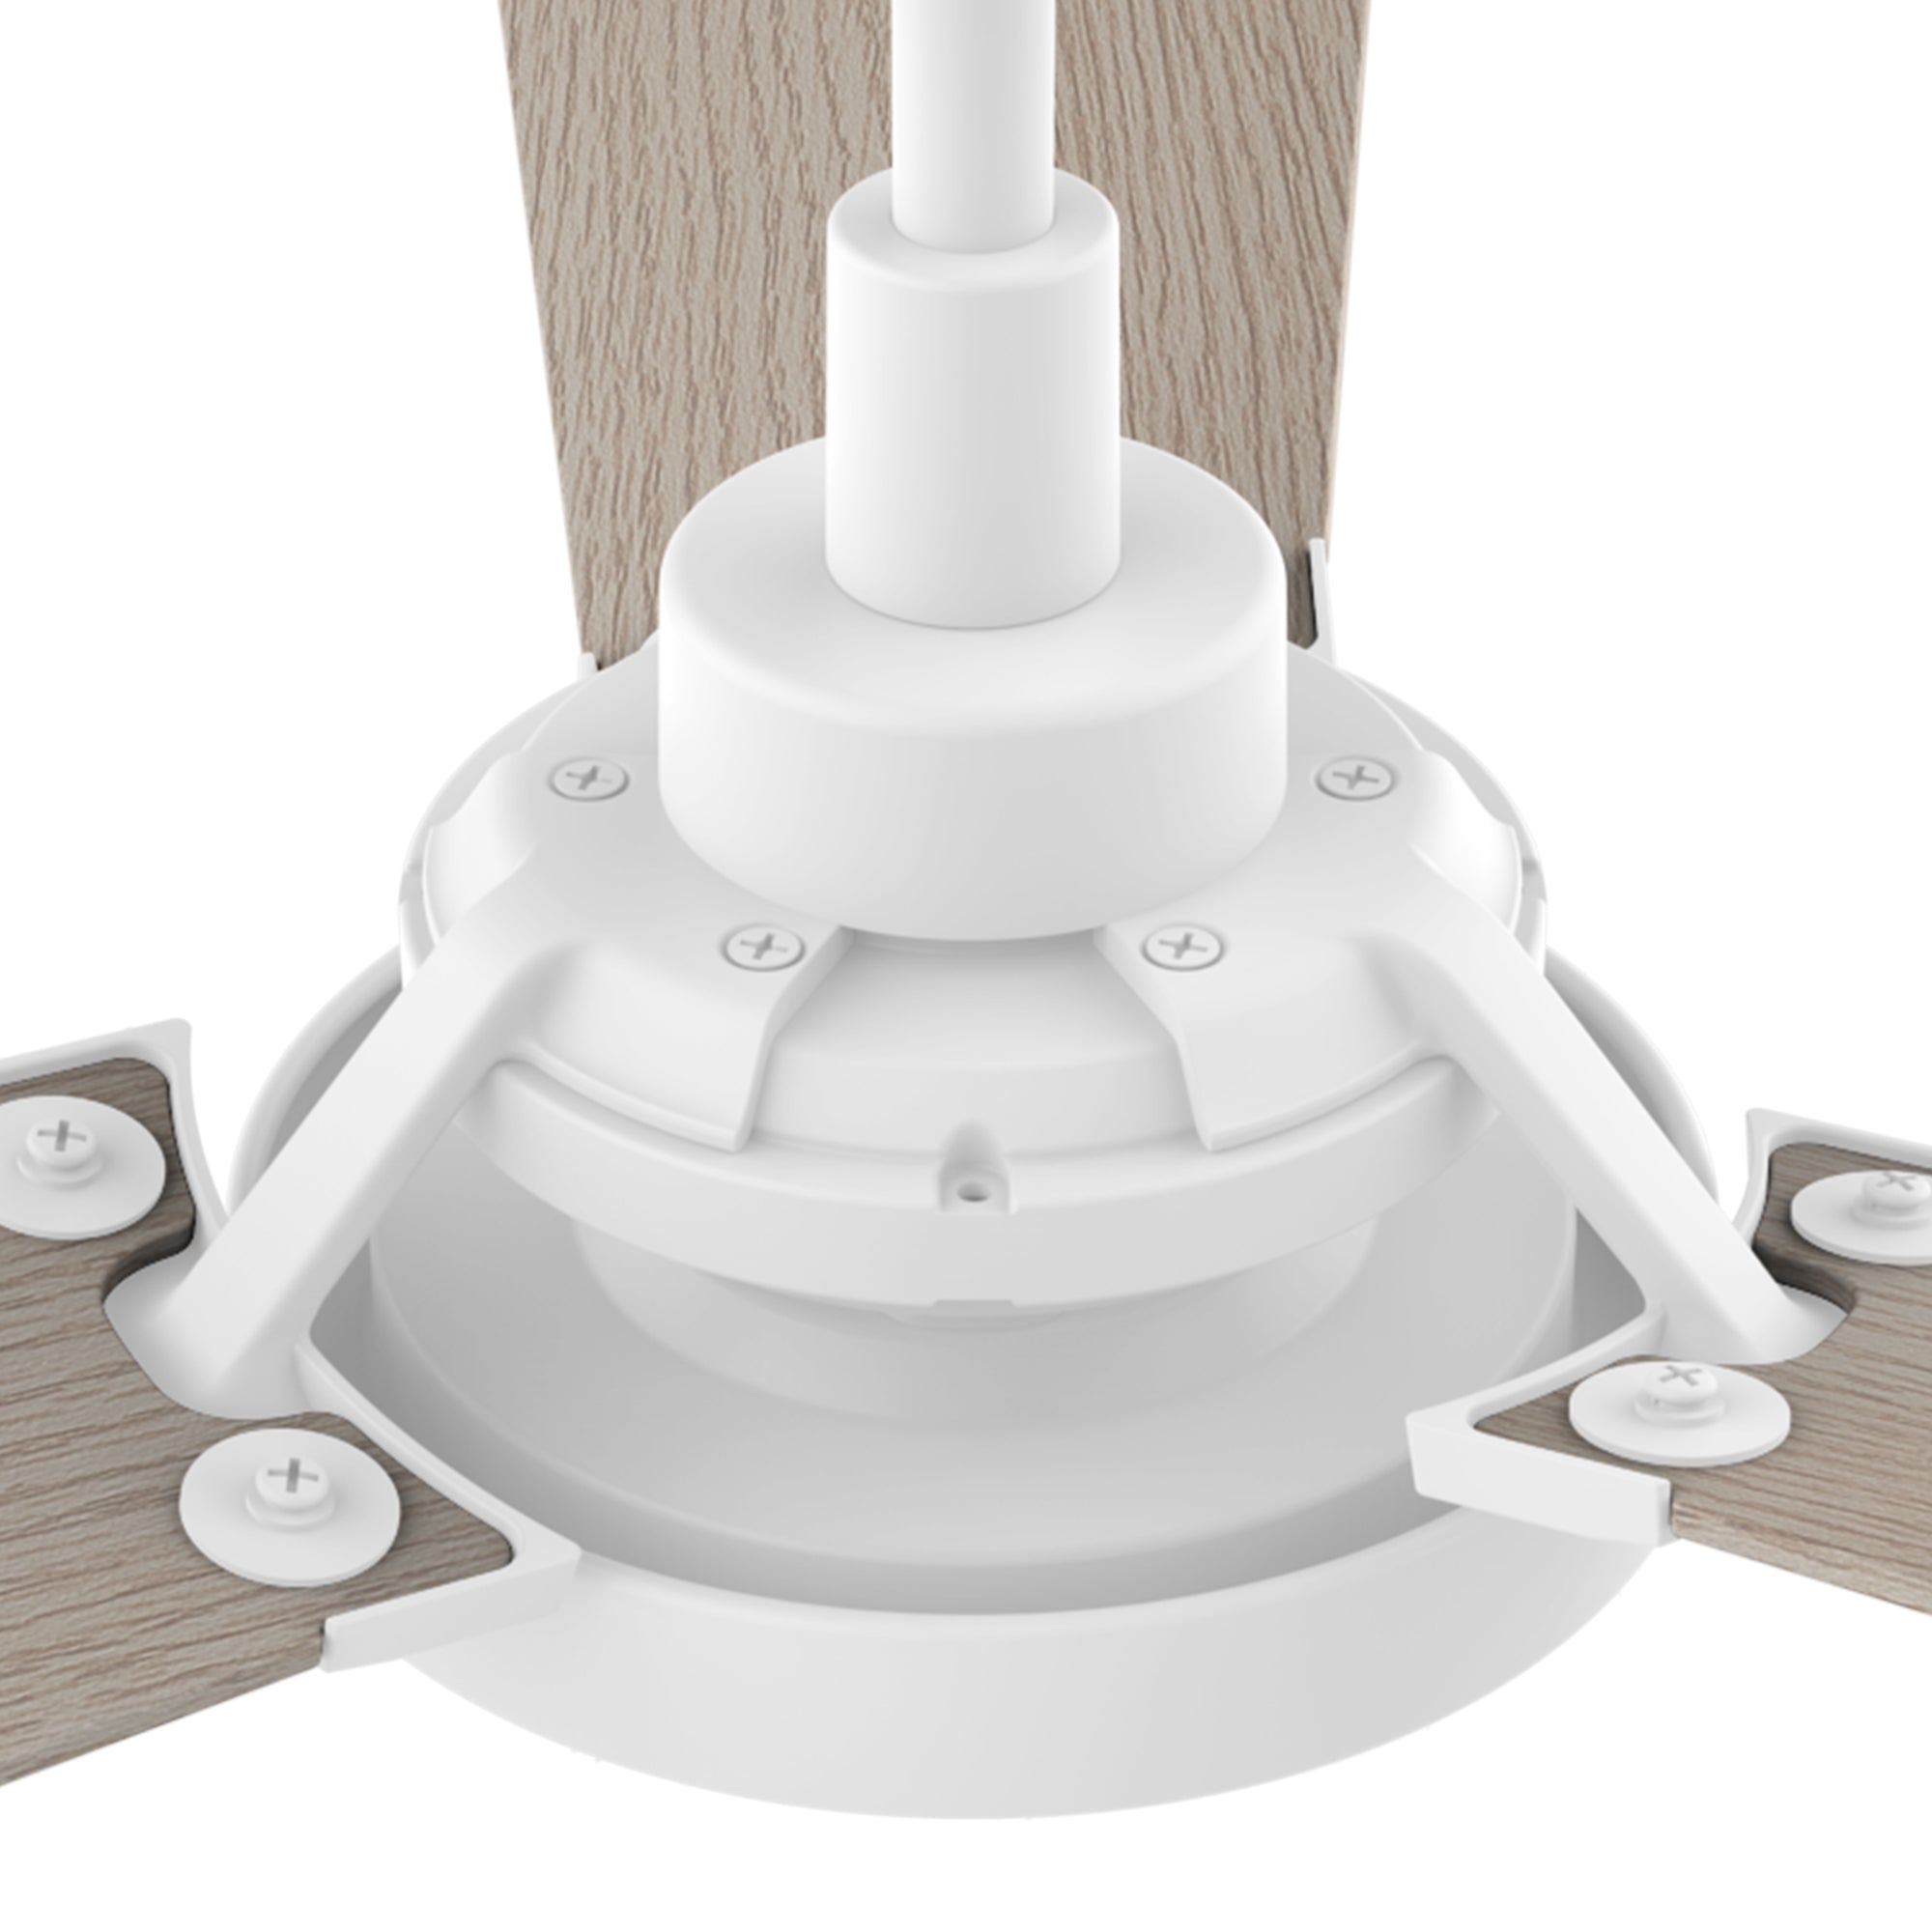 This smart ceiling fan is a simplicity designing with White finish, use elegant Plywood blades, Glass shade and has an integrated 4000K LED daylight. The fan features Remote control, Wi-Fi apps, Siri Shortcut and Voice control technology (compatible with Amazon Alexa and Google Home Assistant ) to set fan preferences.#color_Light-Wood